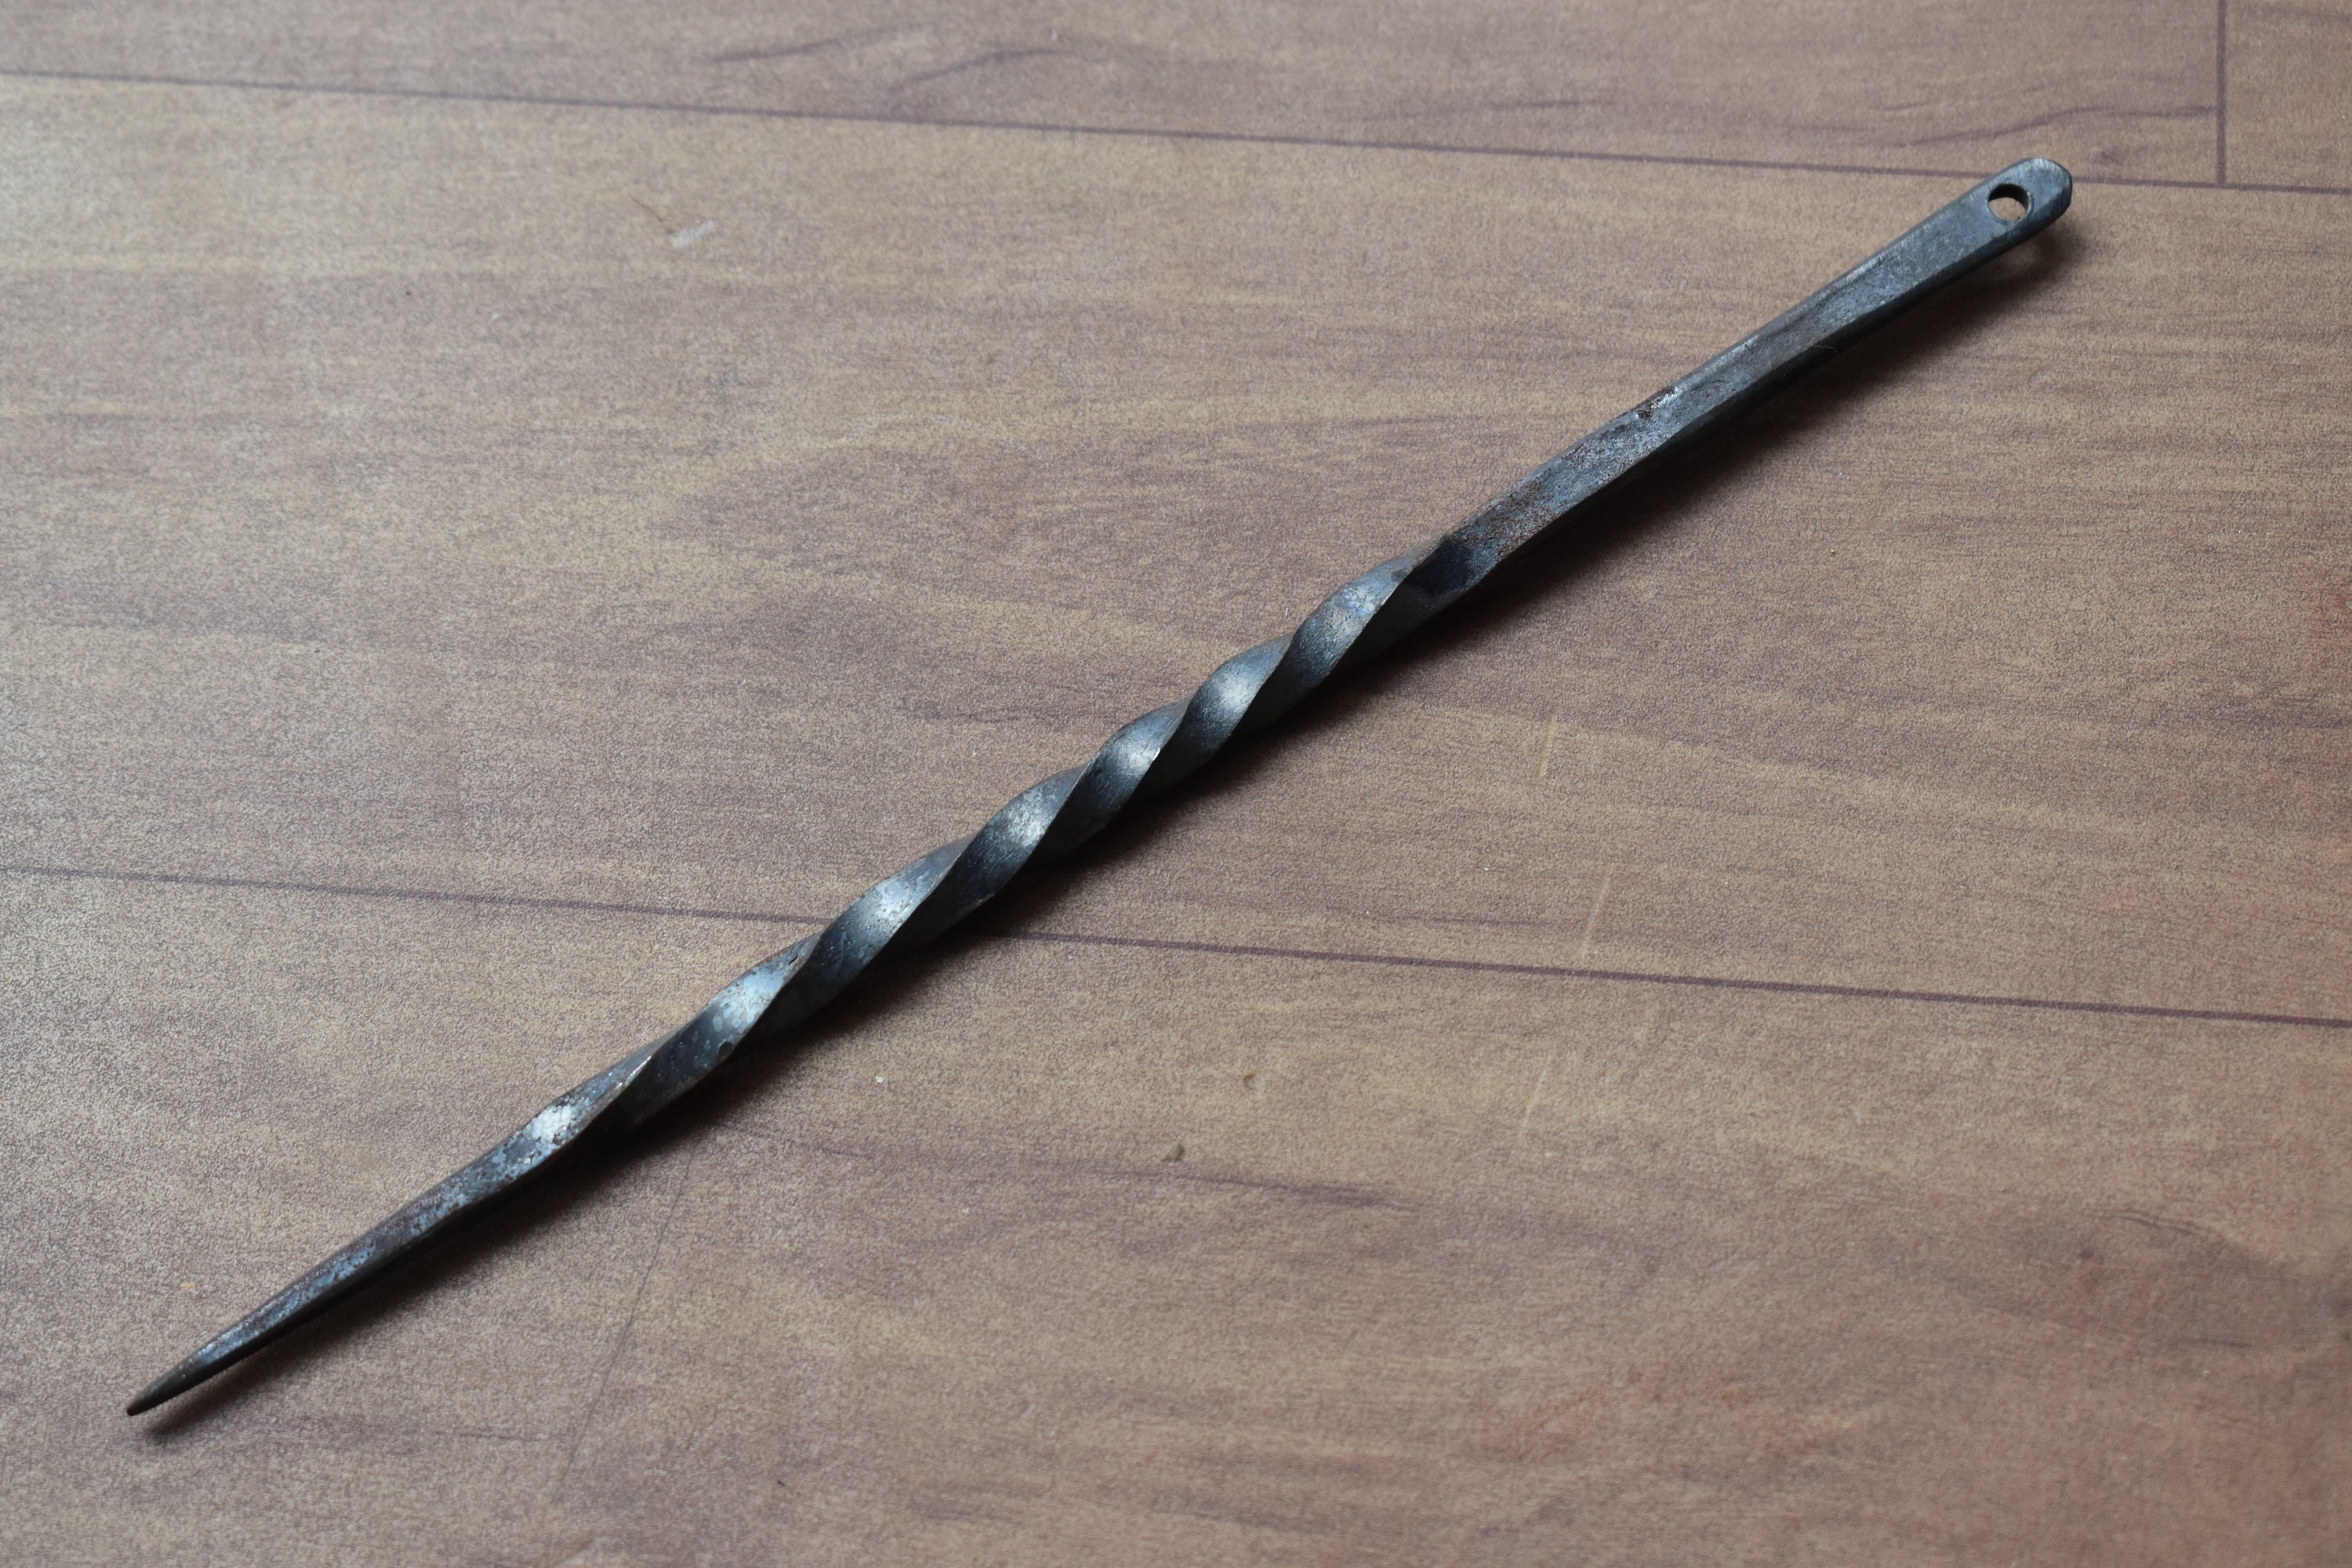 Vntg Blacksmith Hand Forged Iron Twisted Spike Fid Spiral - Etsy